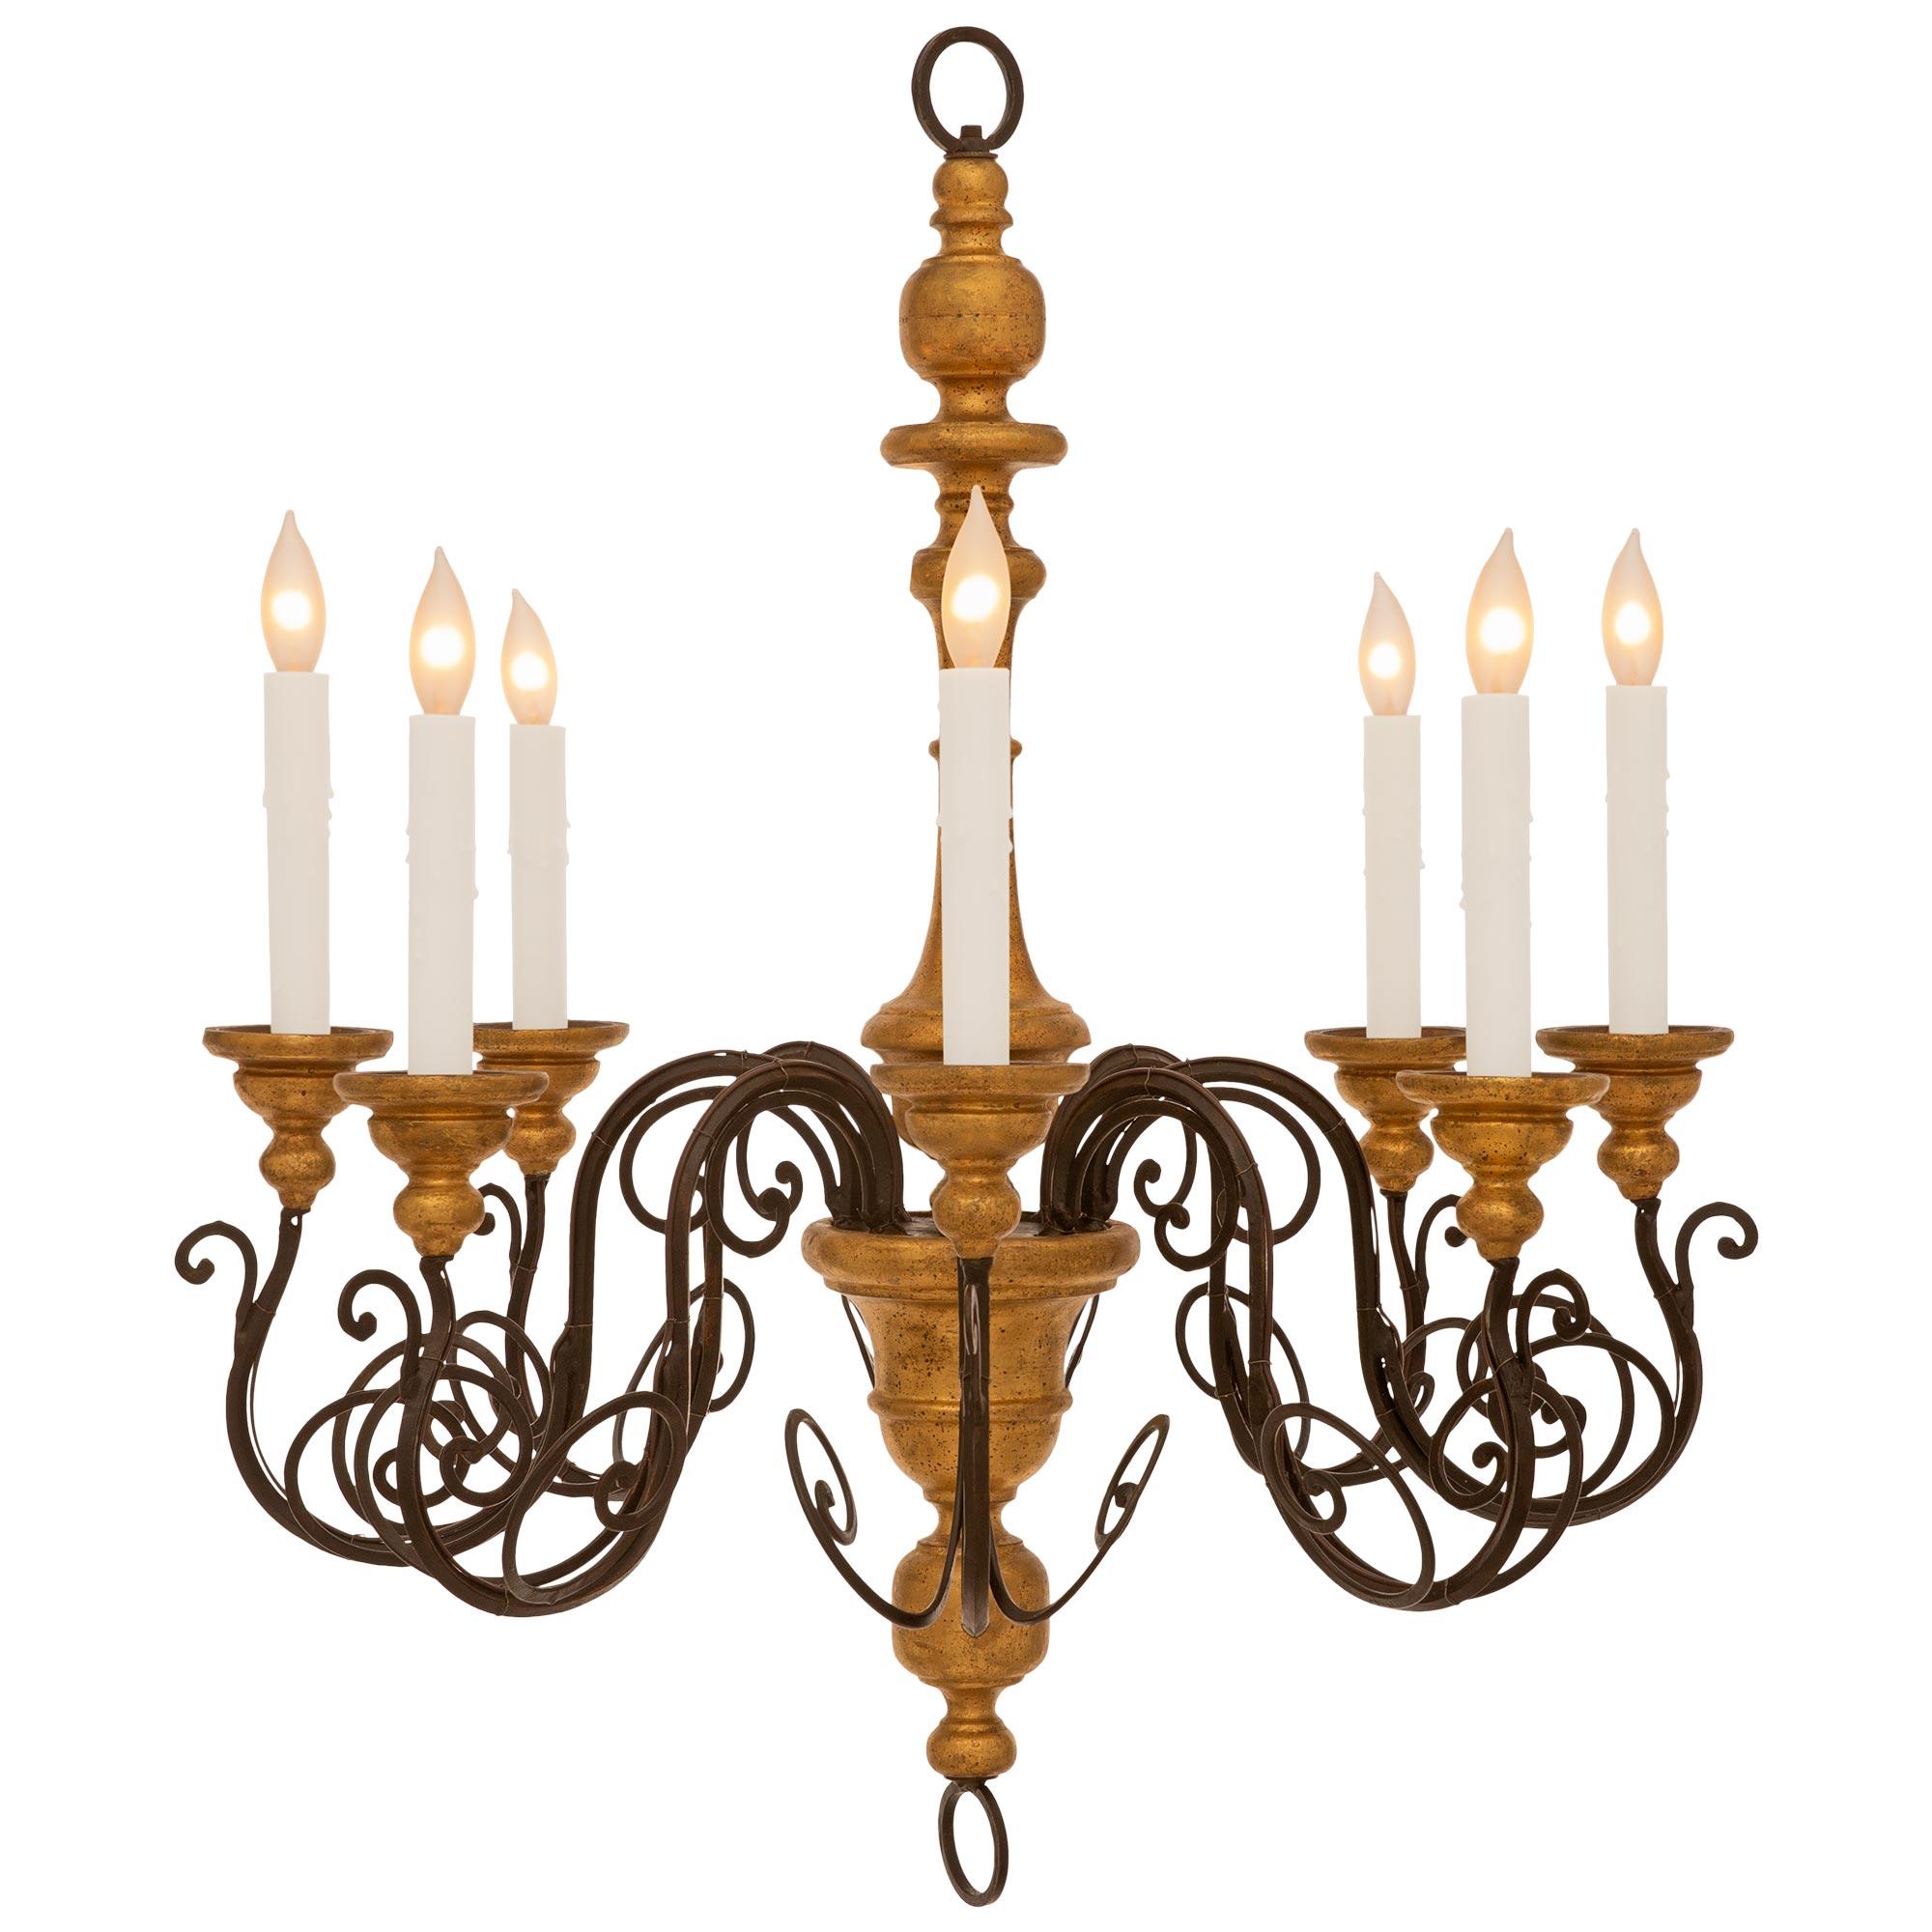 A very decorative pair of Italian turn of the century Wrought Iron and Giltwood chandeliers. The pair of eight arm chandeliers have central turned Giltwood futs with Wrought Iron protruding arms at the mid sections. Each 'S' scrolled Wrought Iron